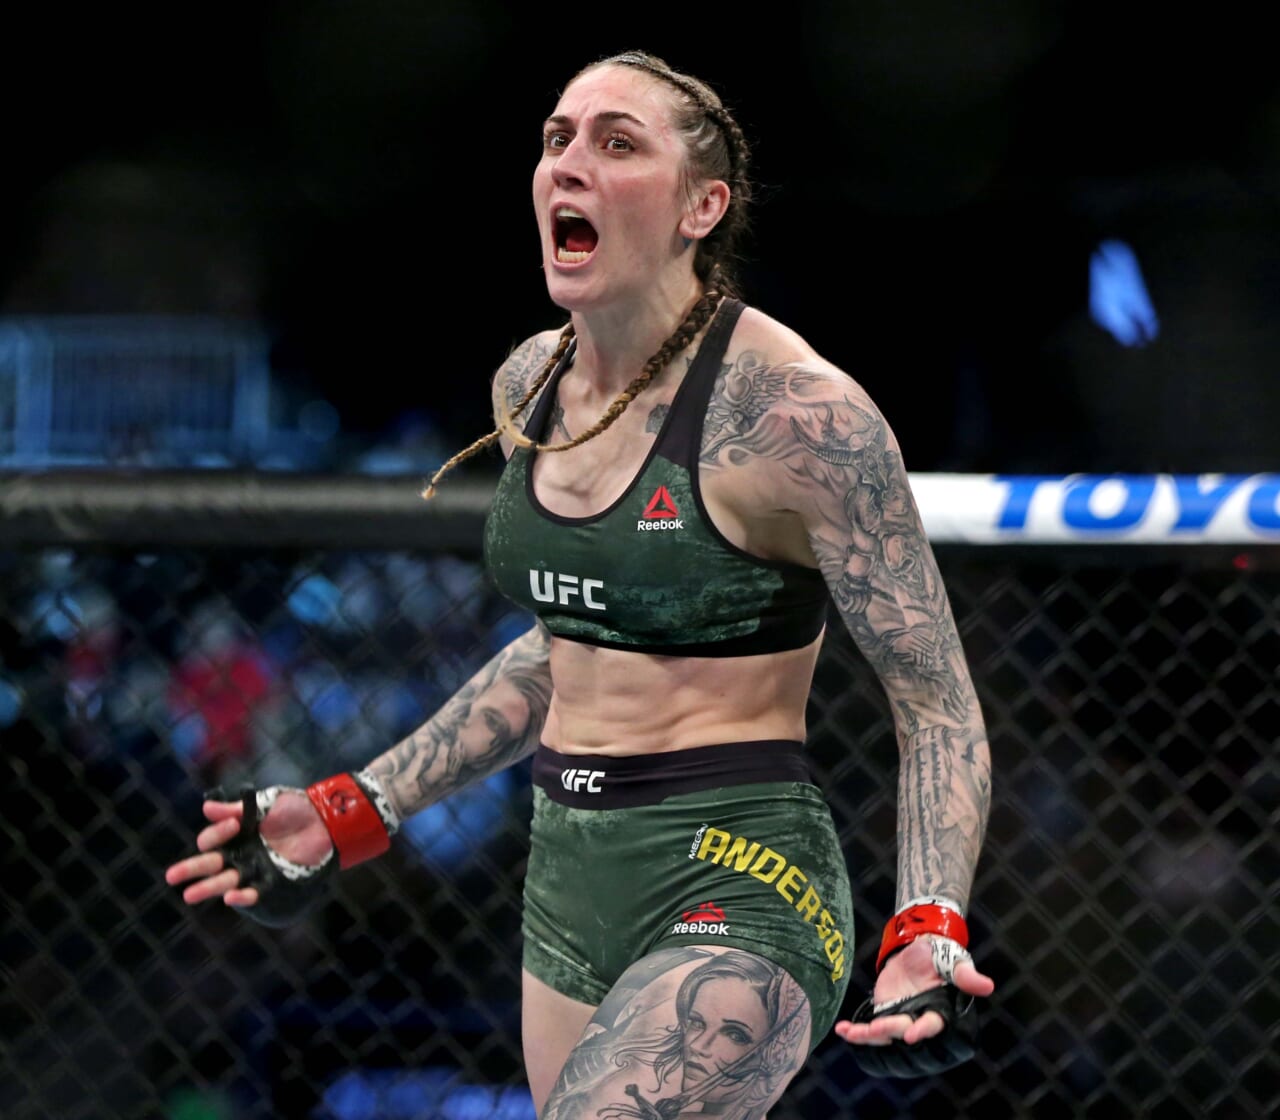 UFC denies closing featherweight despite claims from Megan Anderson